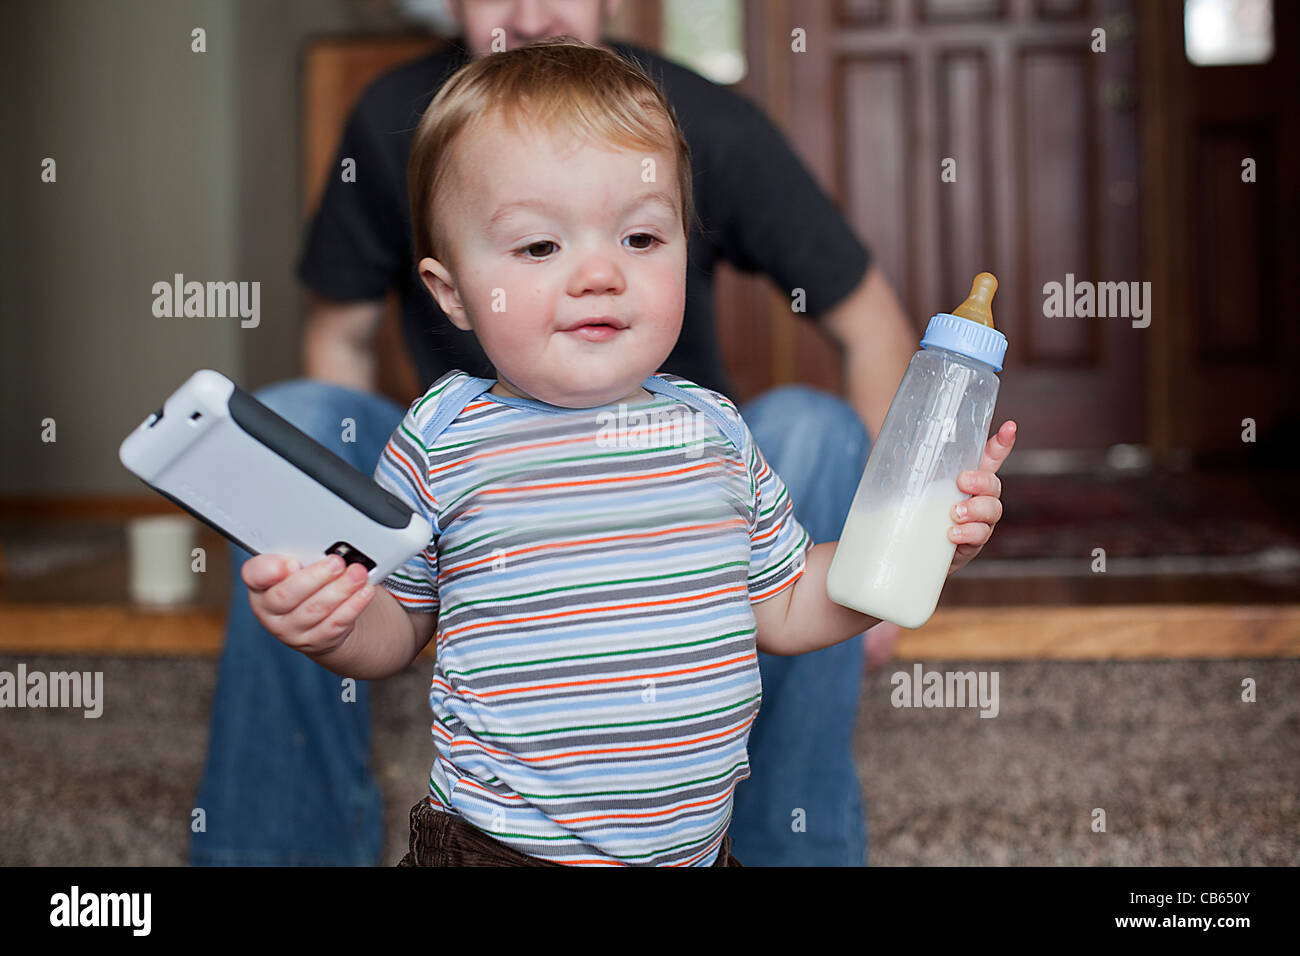 Toddler boy holding has bottle and a smart phone in his hands. Stock Photo